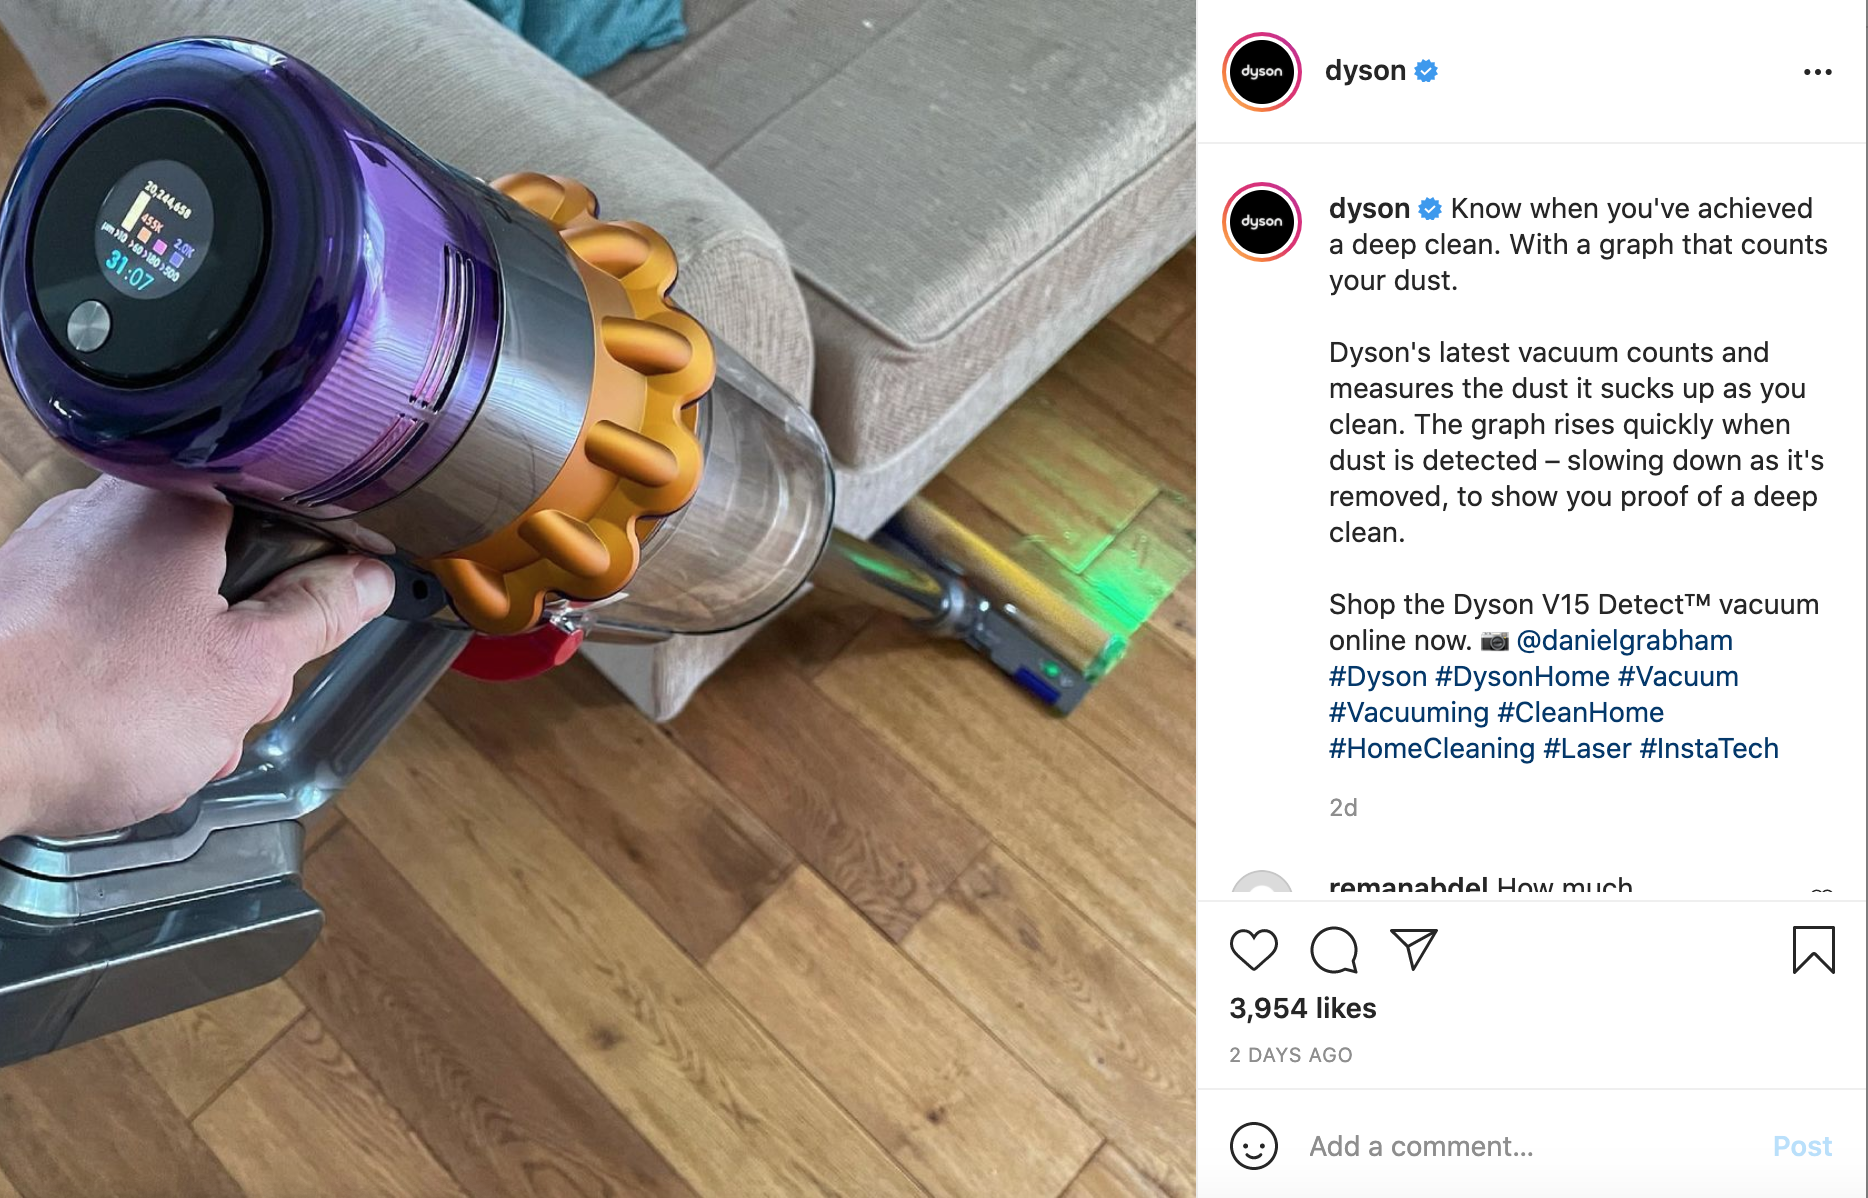 Dyson post-sales content marketing strategy